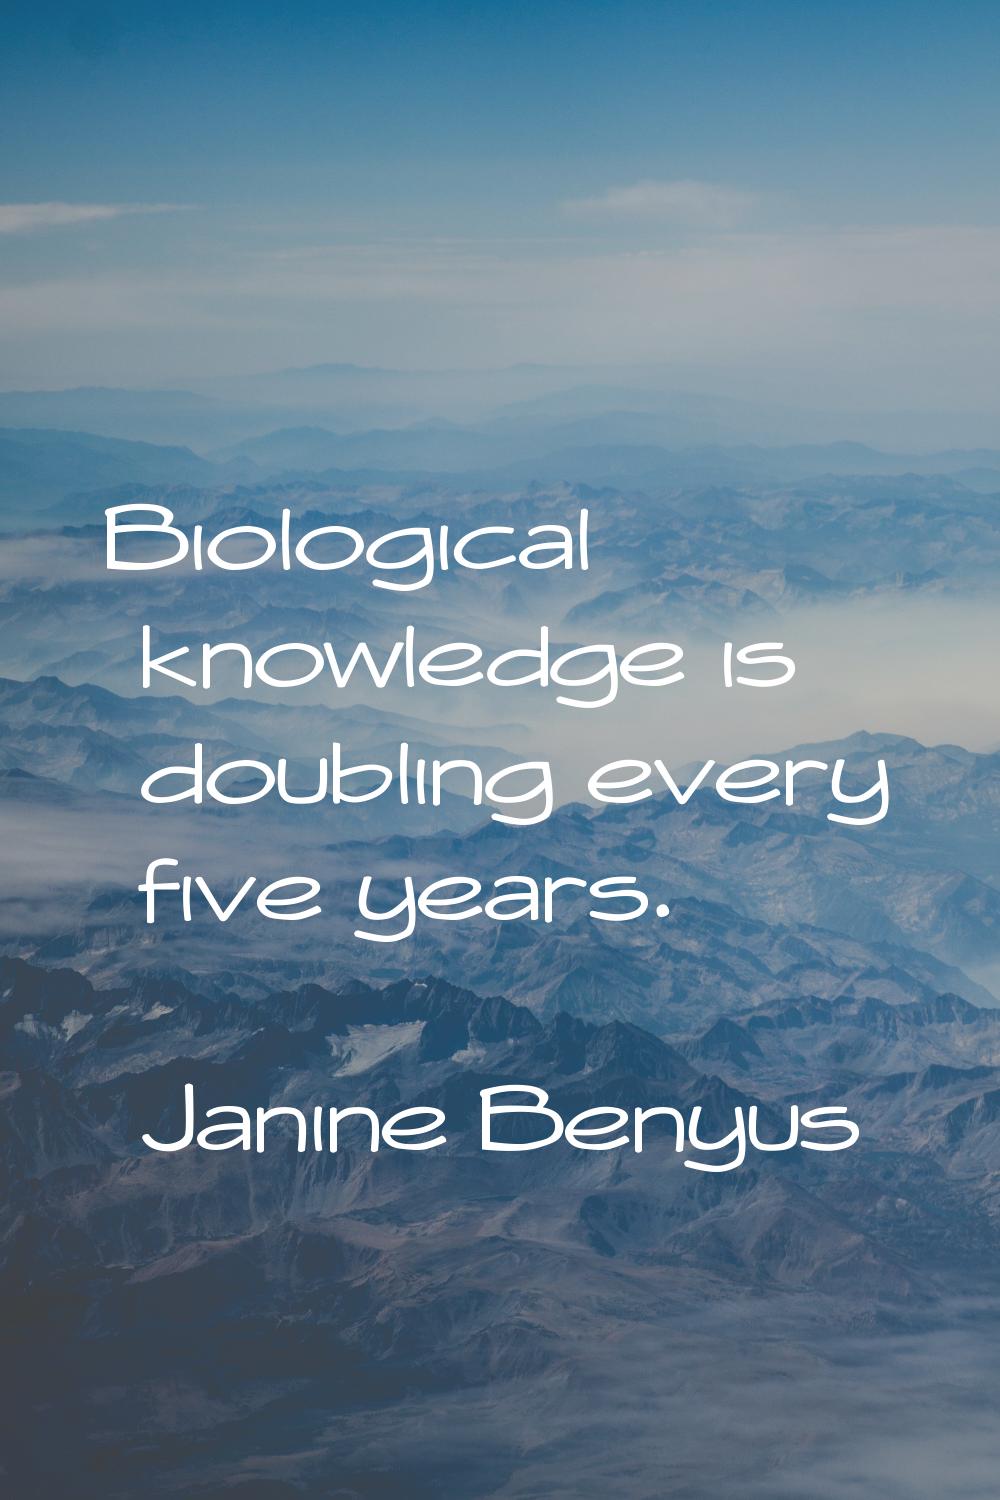 Biological knowledge is doubling every five years.